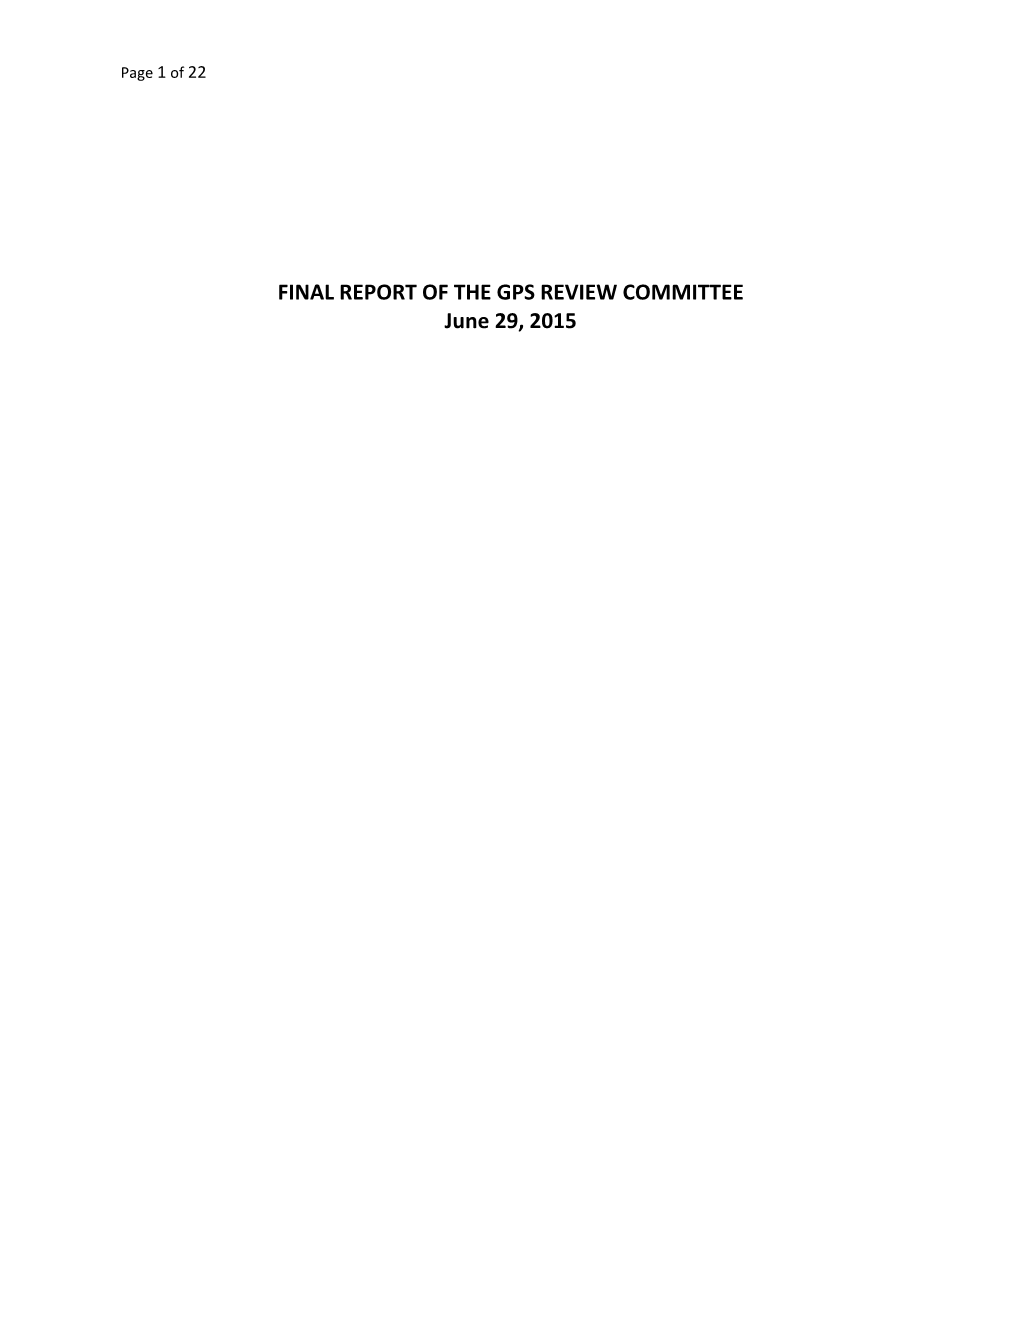 FINAL REPORT of the GPS REVIEW COMMITTEE June 29, 2015